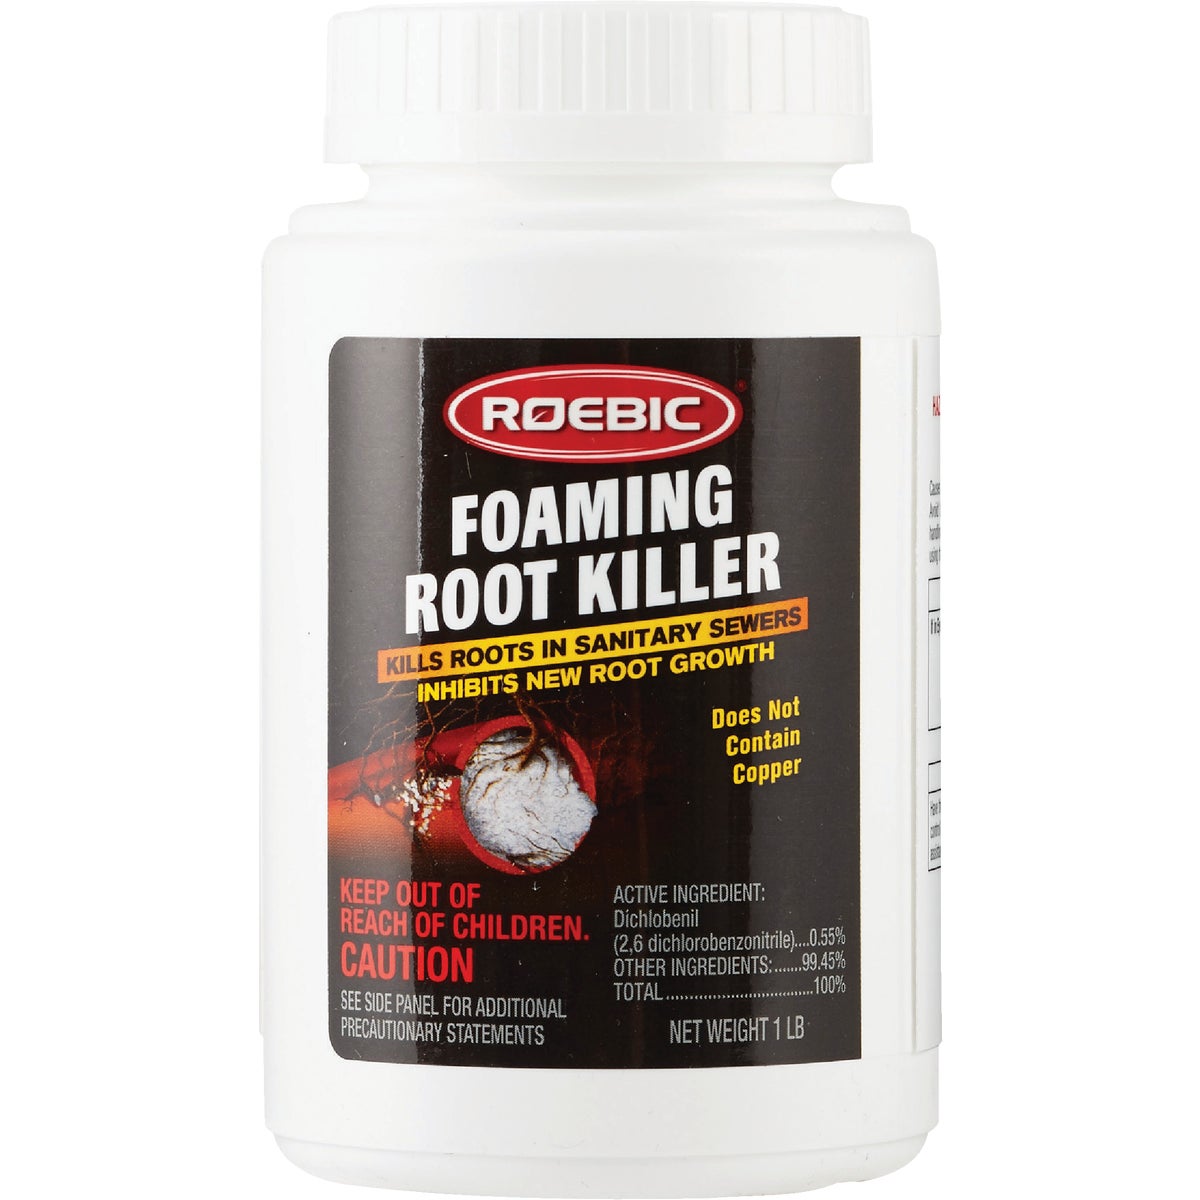 Item 453234, Recommended for severe, recurring root problems.